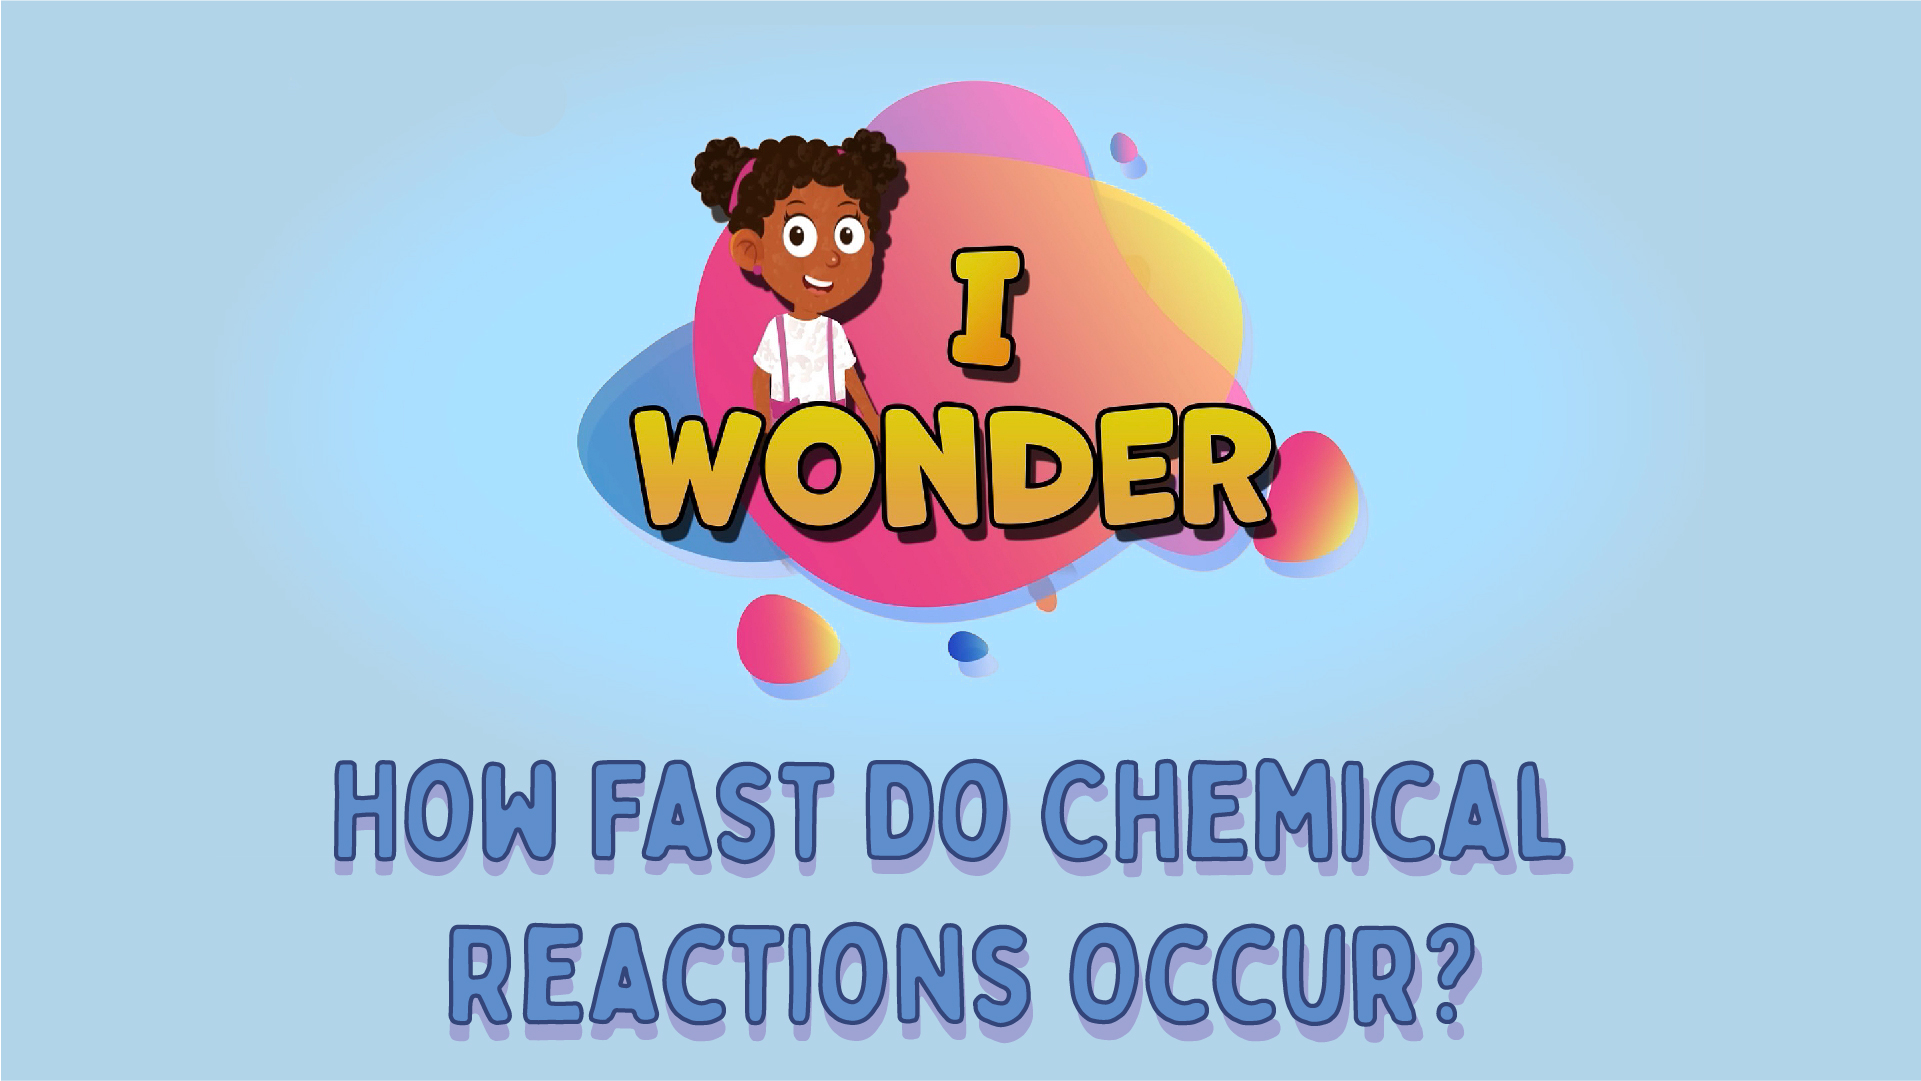 How Fast Do Chemical Reactions Occur?